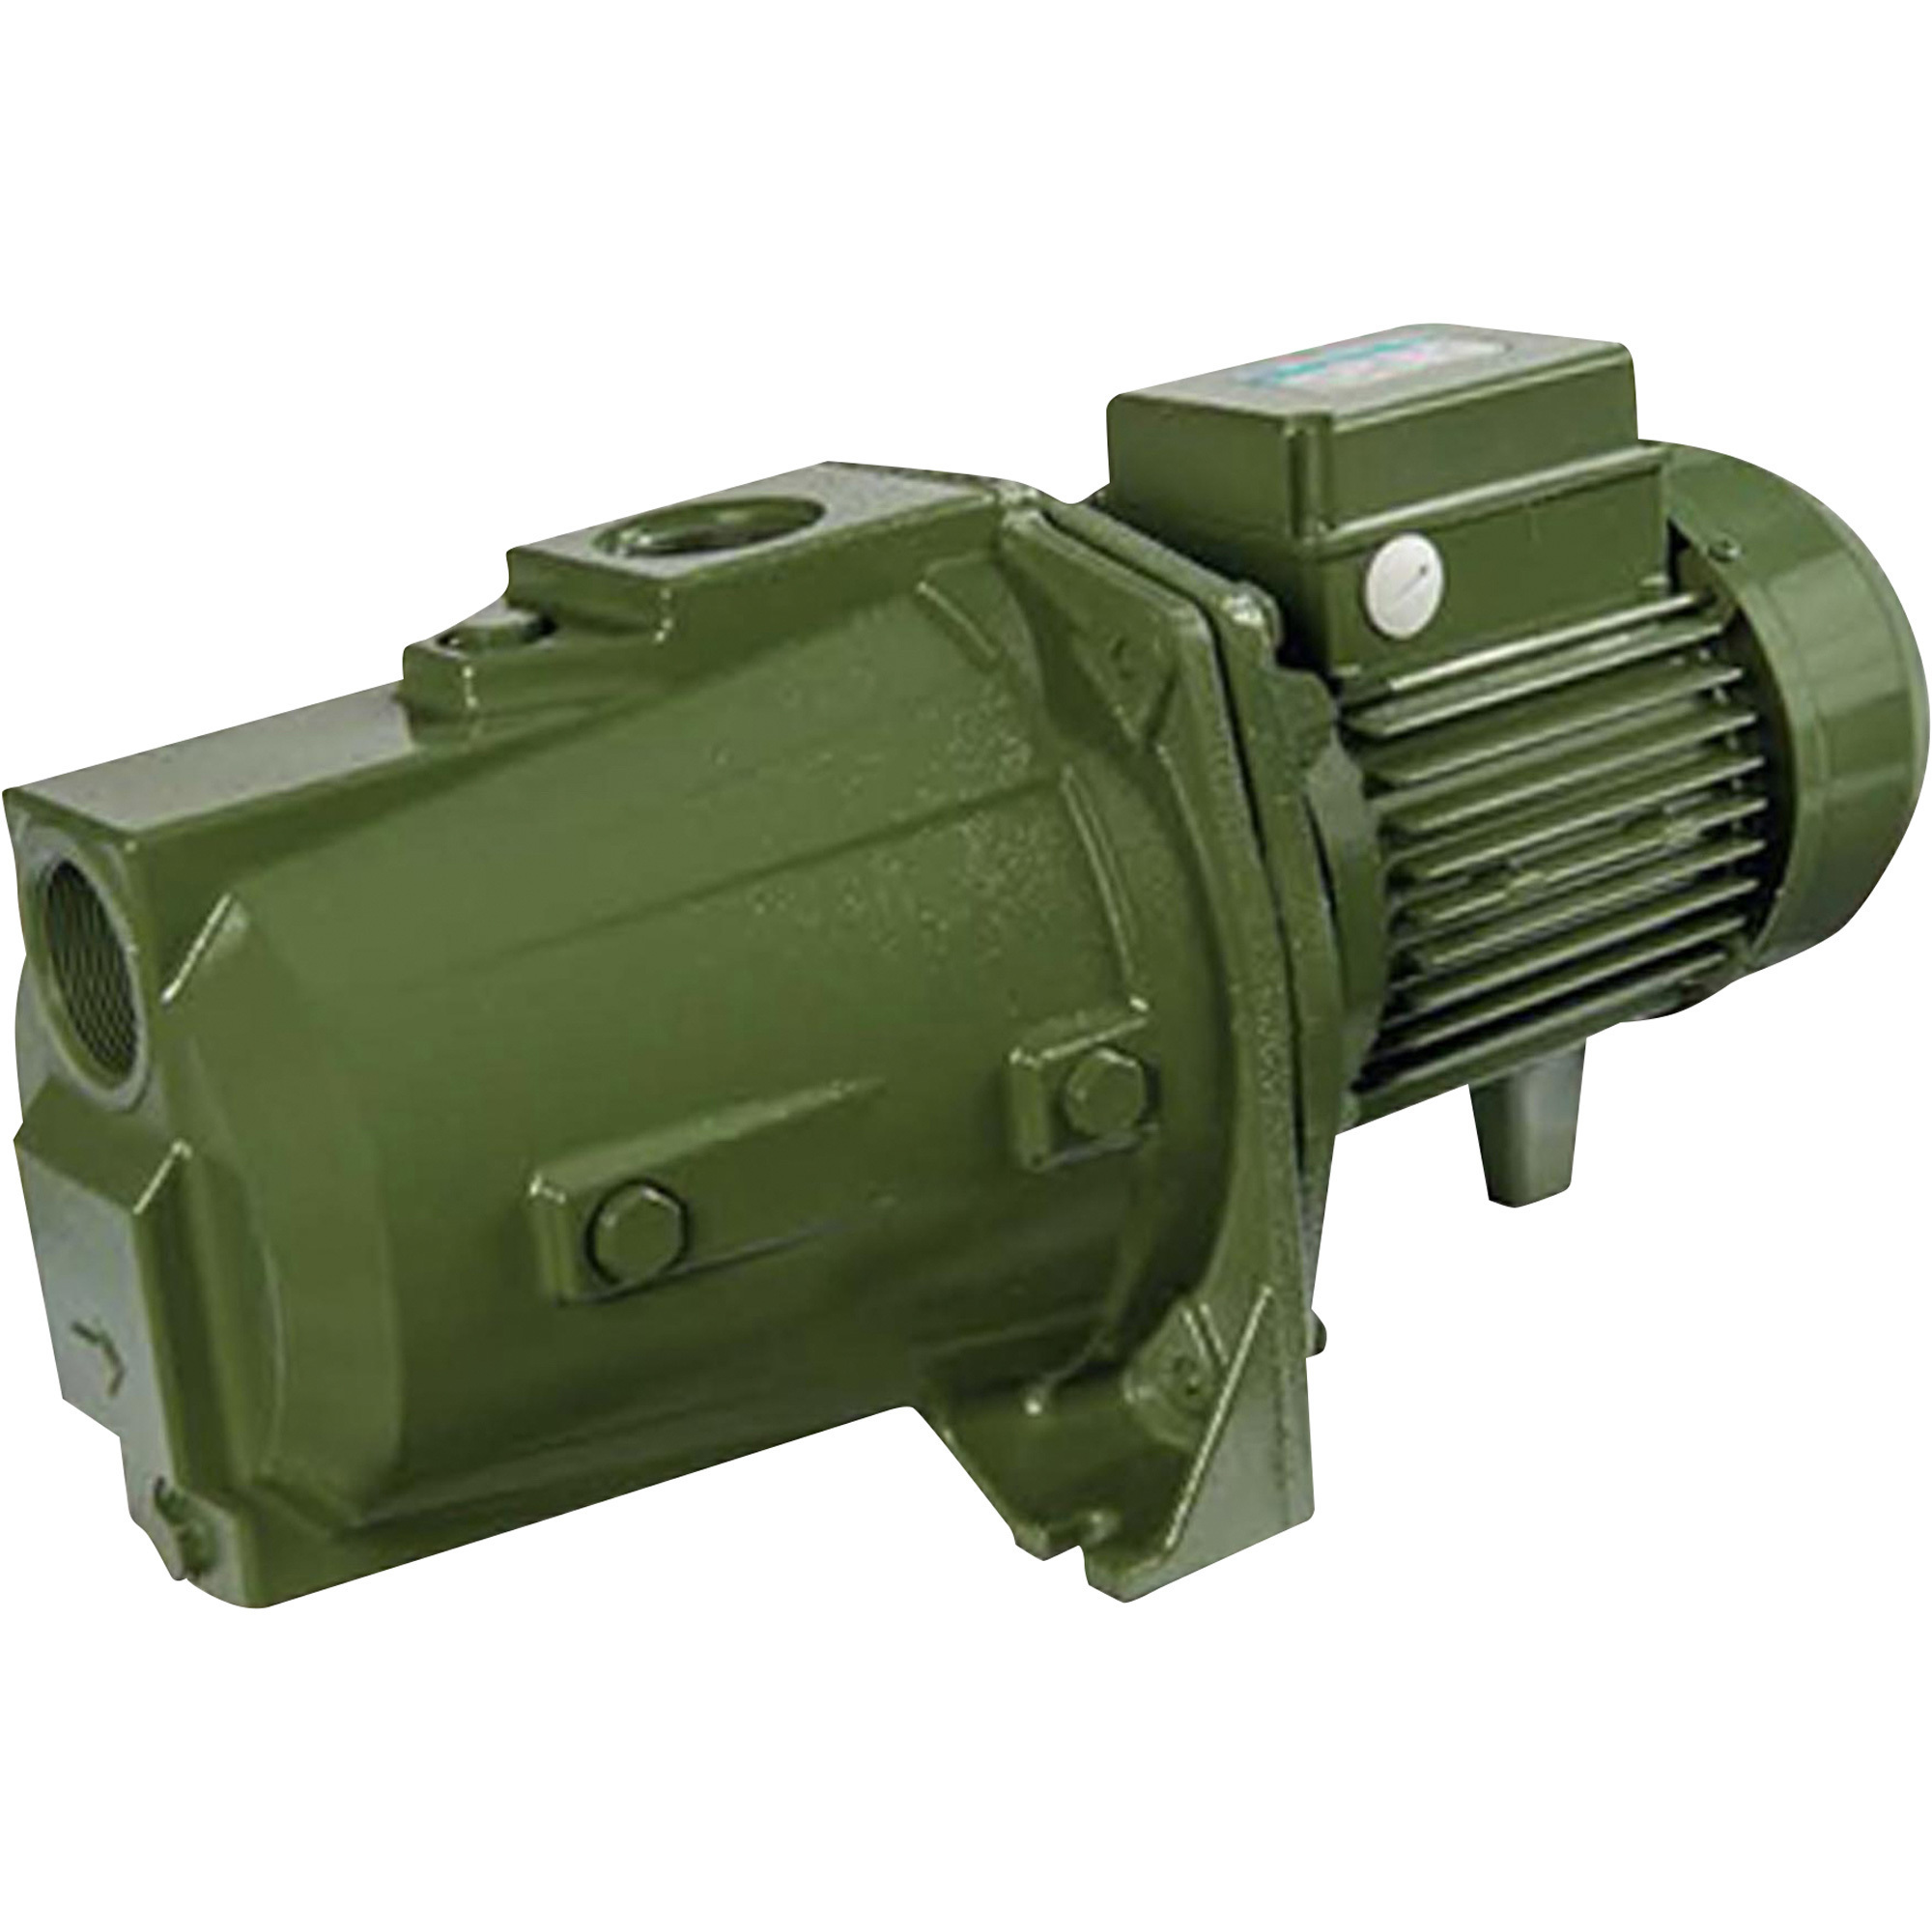 SAER-USA Self-Priming Jet Pump, 3000 GPH, 3 HP, 1 1/4Inch Discharge/1 1/2Inch Suction Ports, Model M500